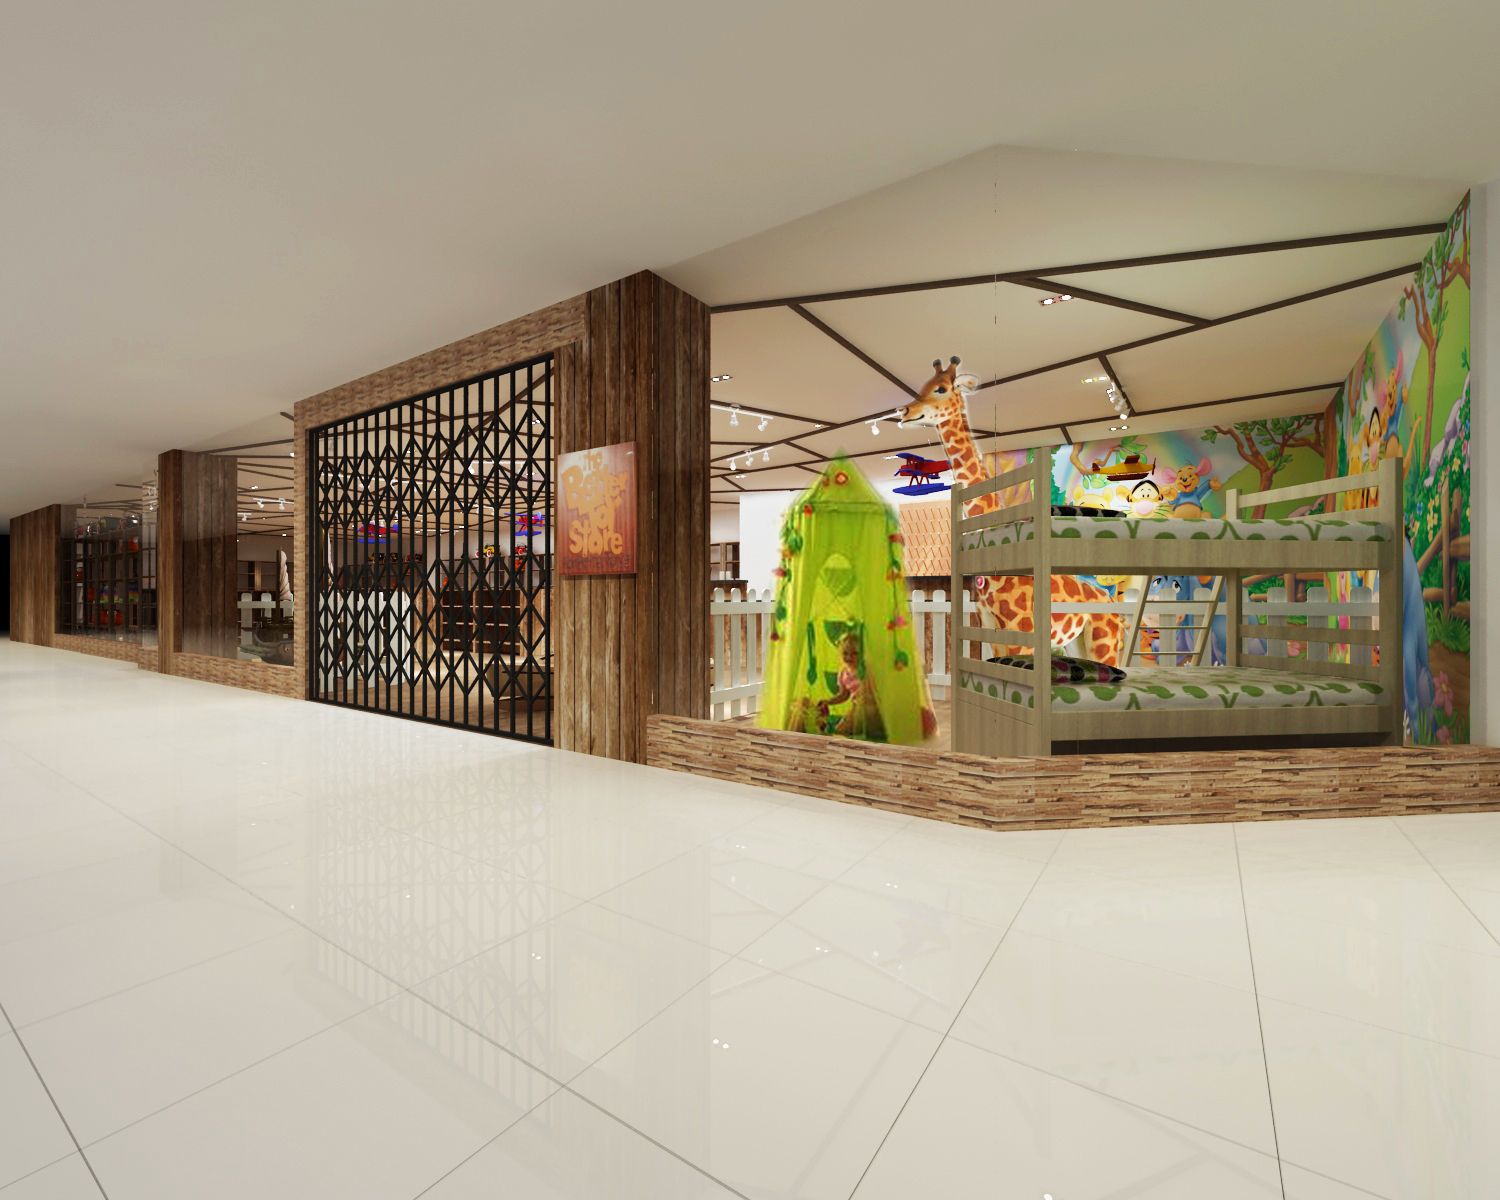 Retail shop renovation project in Orchard Singapore